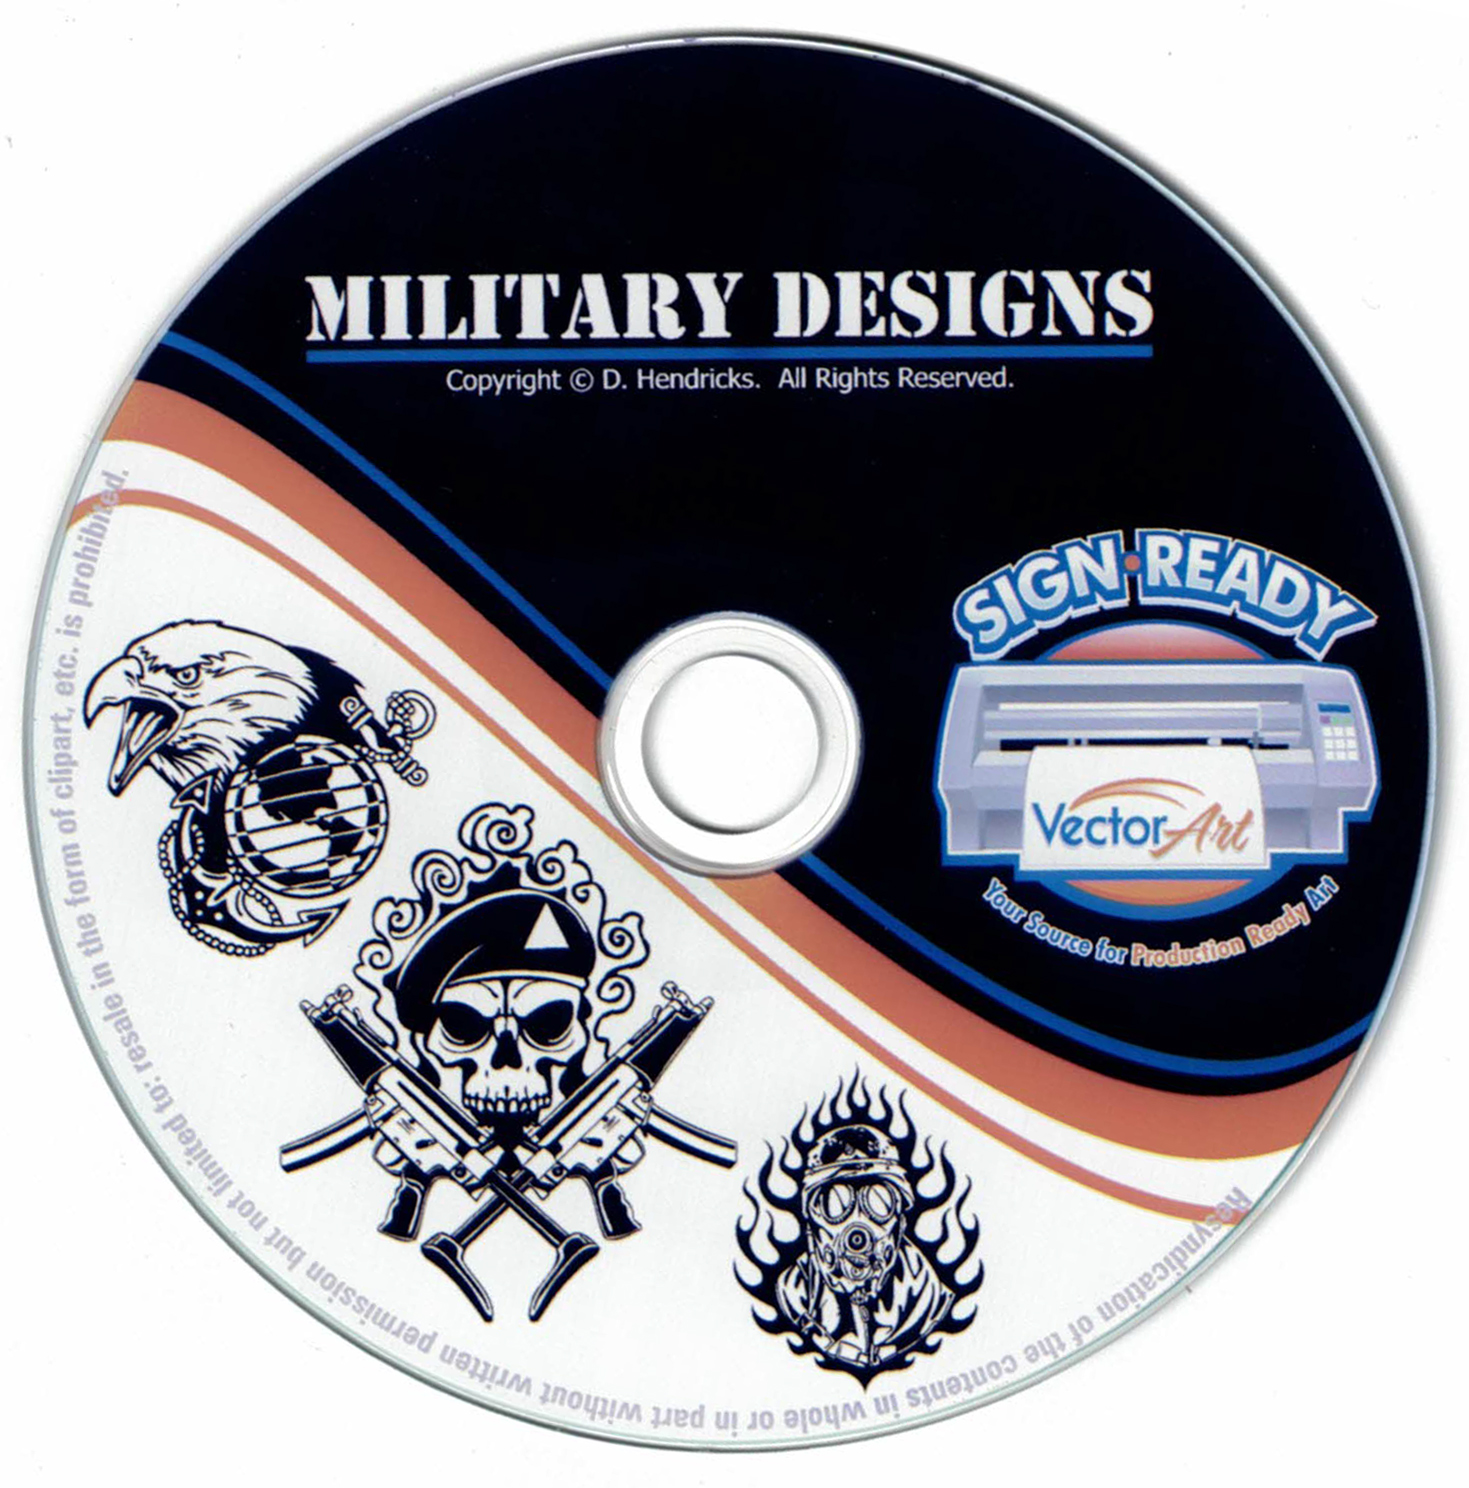 Military Designs for the Army, Marines, Navy, and Air Force Personnel